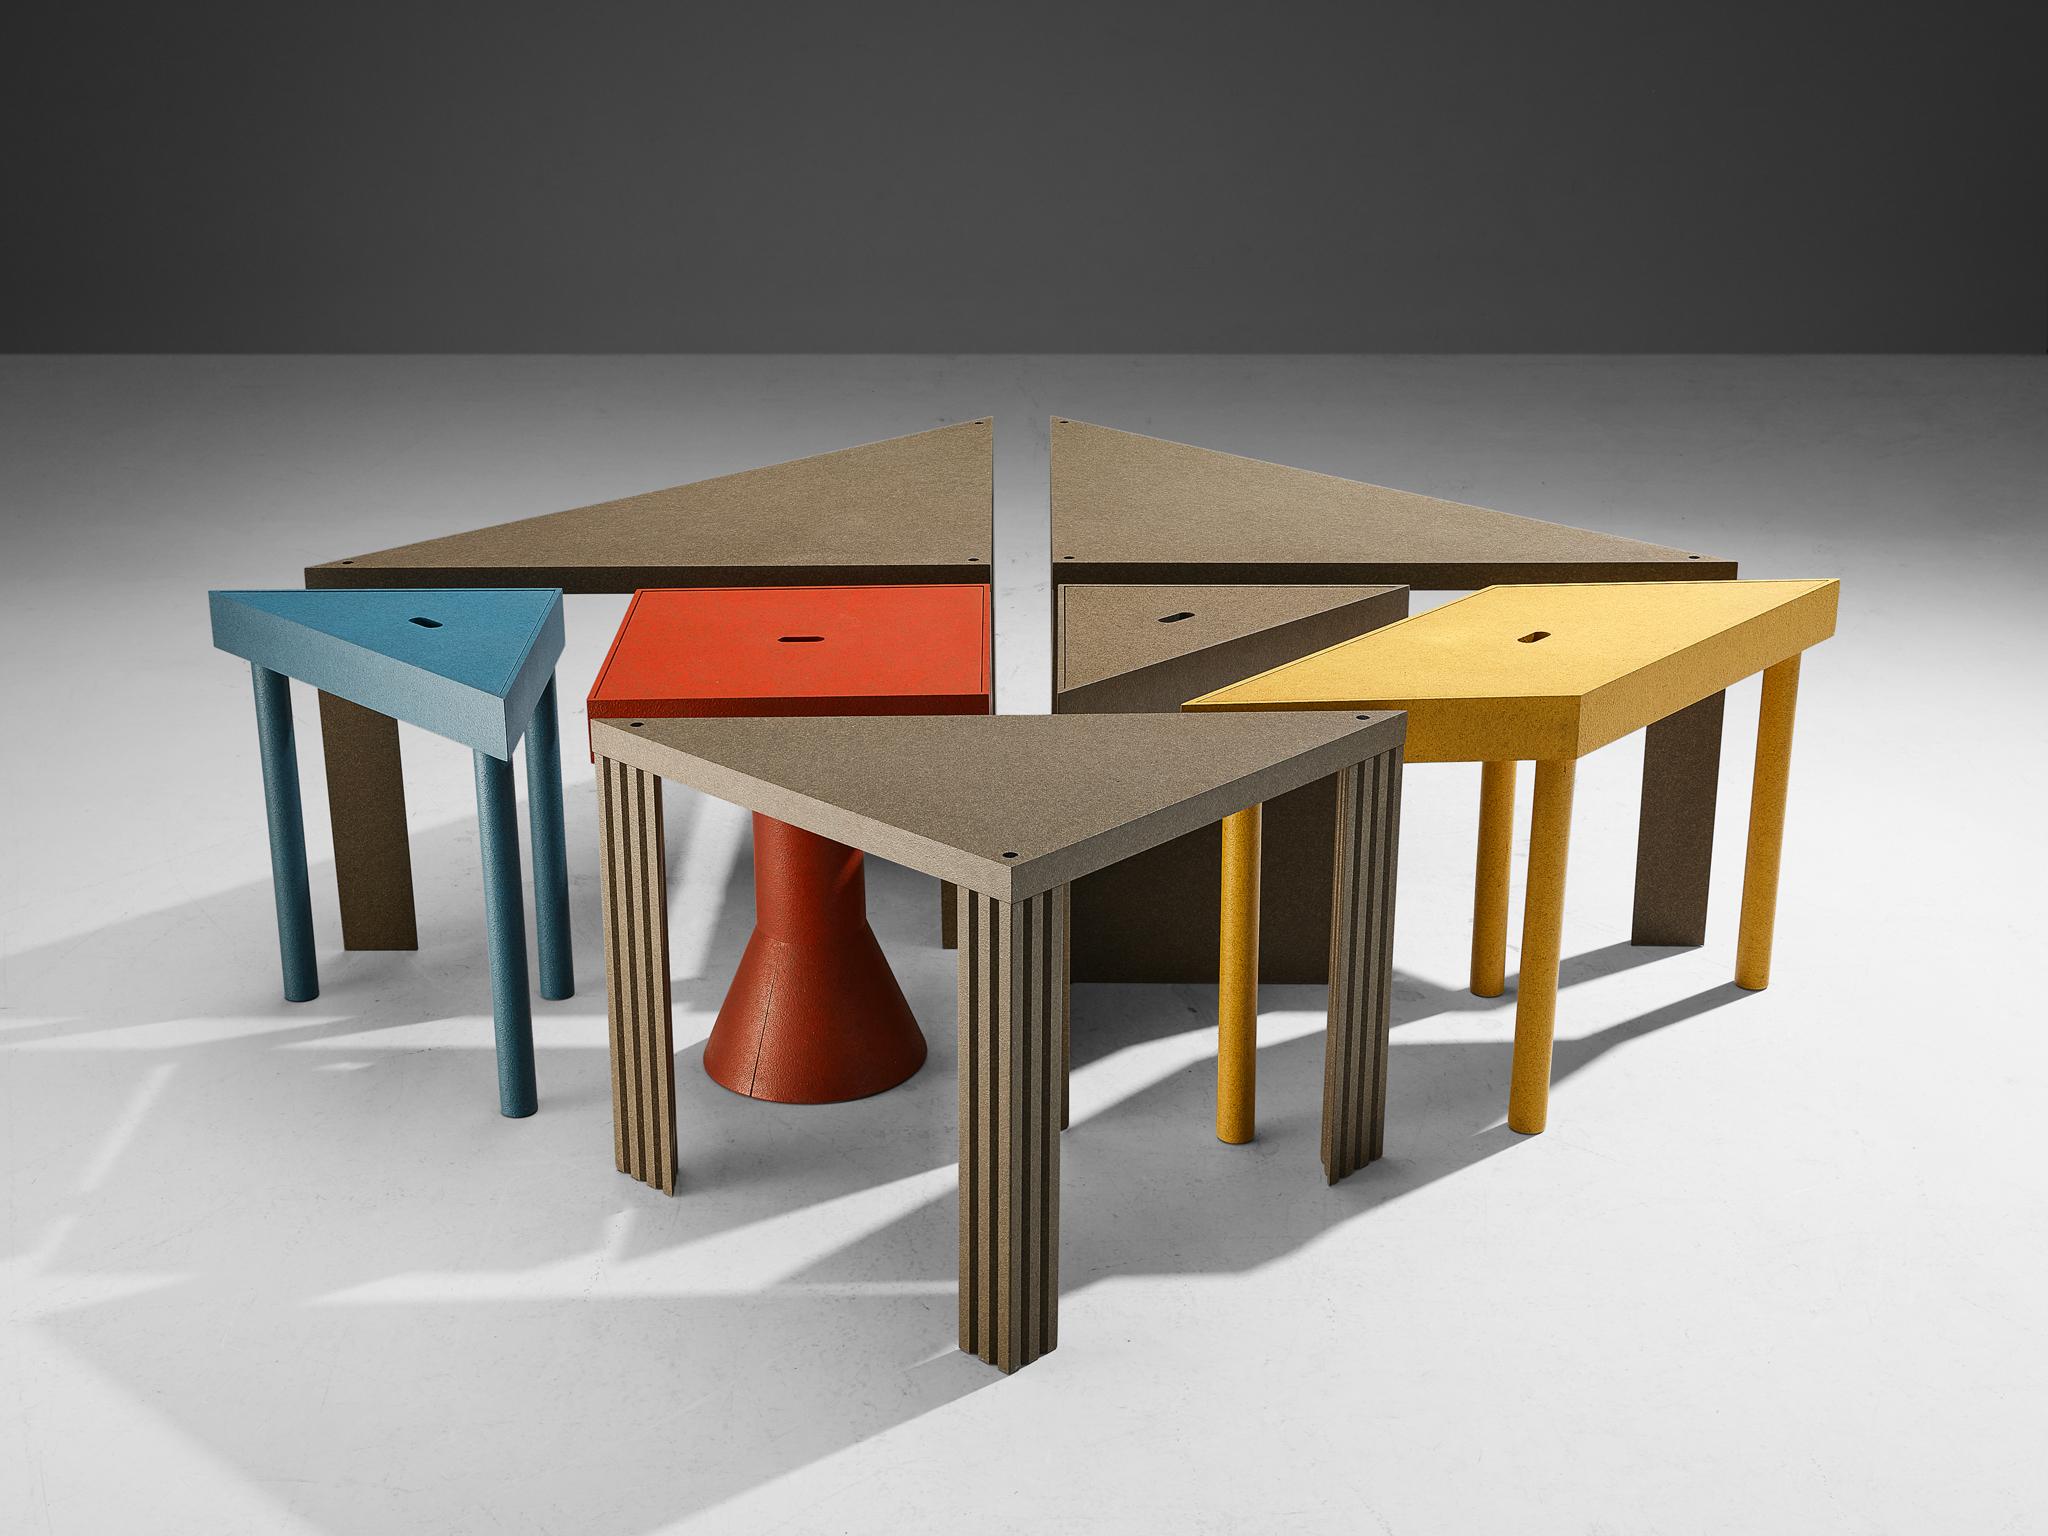 Massimo Morozzi for Cassina, ‘Tangram’ dining table, painted beech, Italy, 1983

The ‘Tangram’ table awakes more than just one association. The design by Massimo Morozzi is modular and therefore versatile, playful in use and color, but still